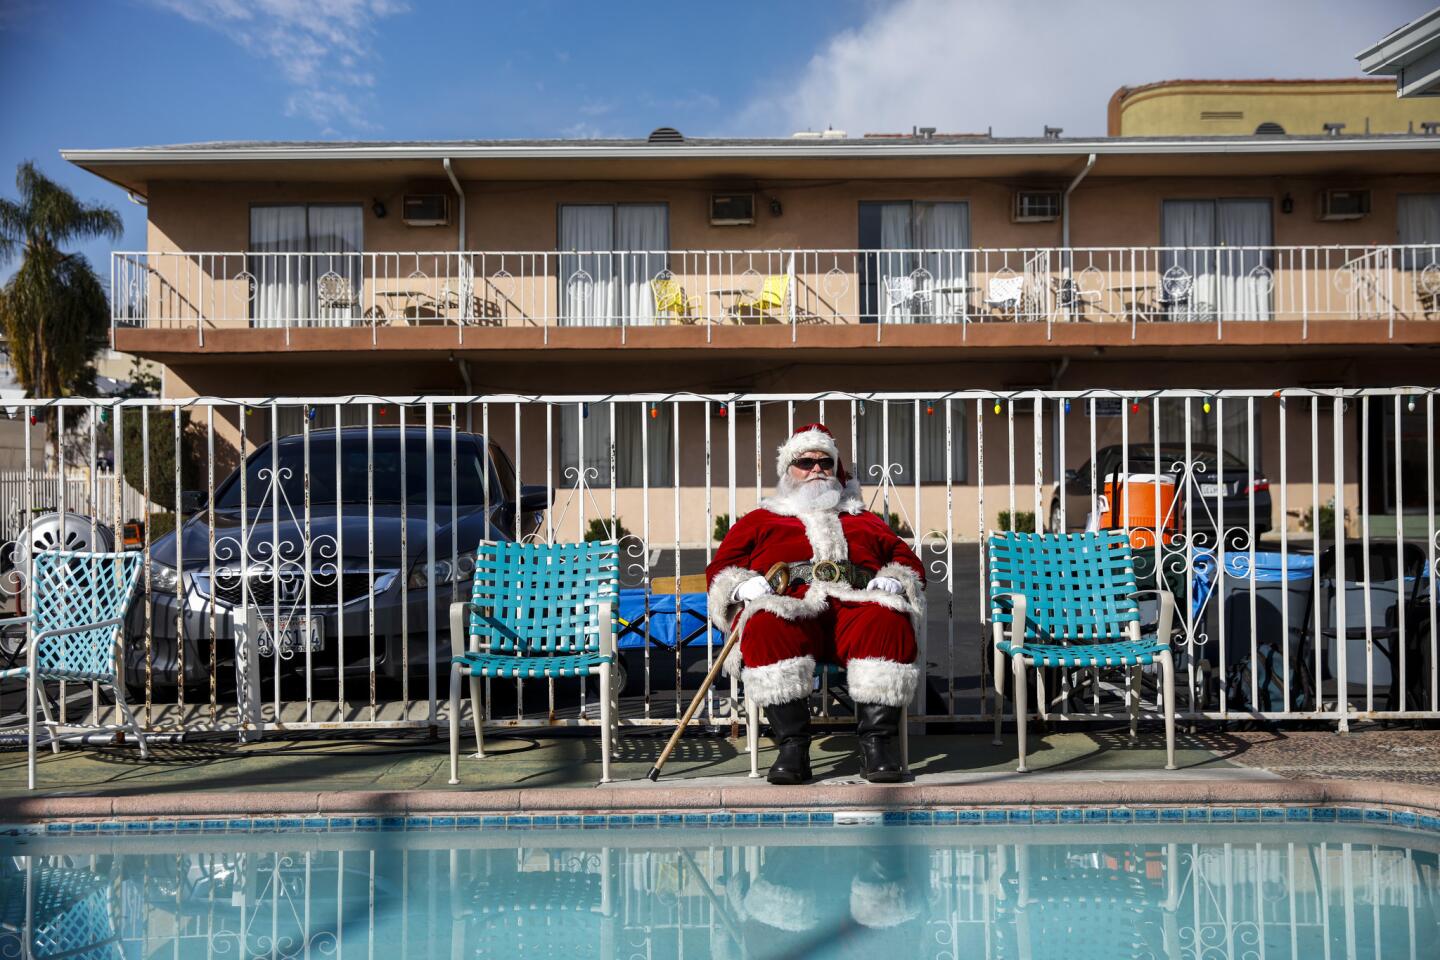 An actor in Santa clothing gets in his "background" position at a motel in Hollywood during filming of FX's Season 3 episode of "Fargo" in February.